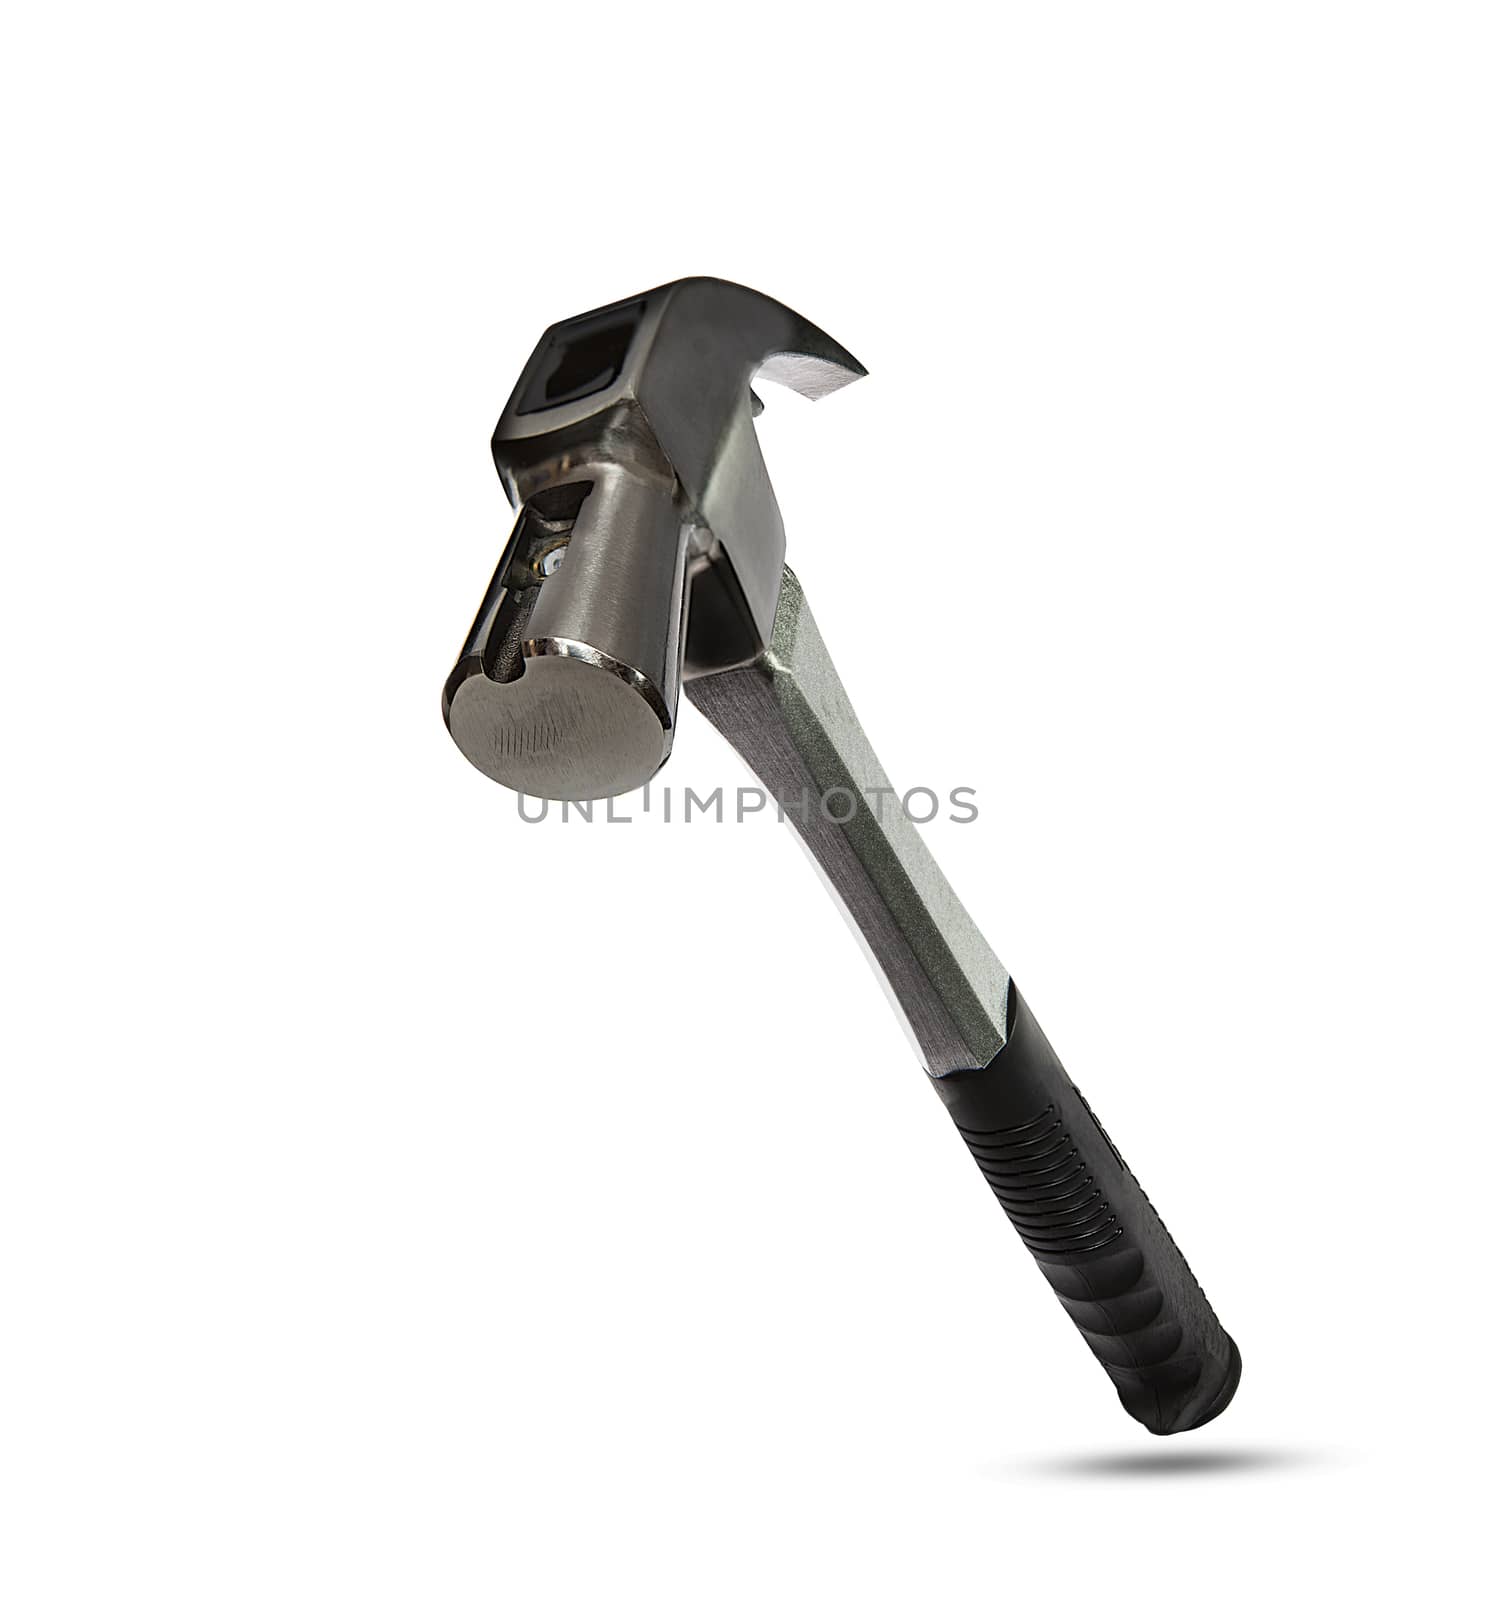 upper view of iron hammer on white background use for home working and diy tool ,industry equipment